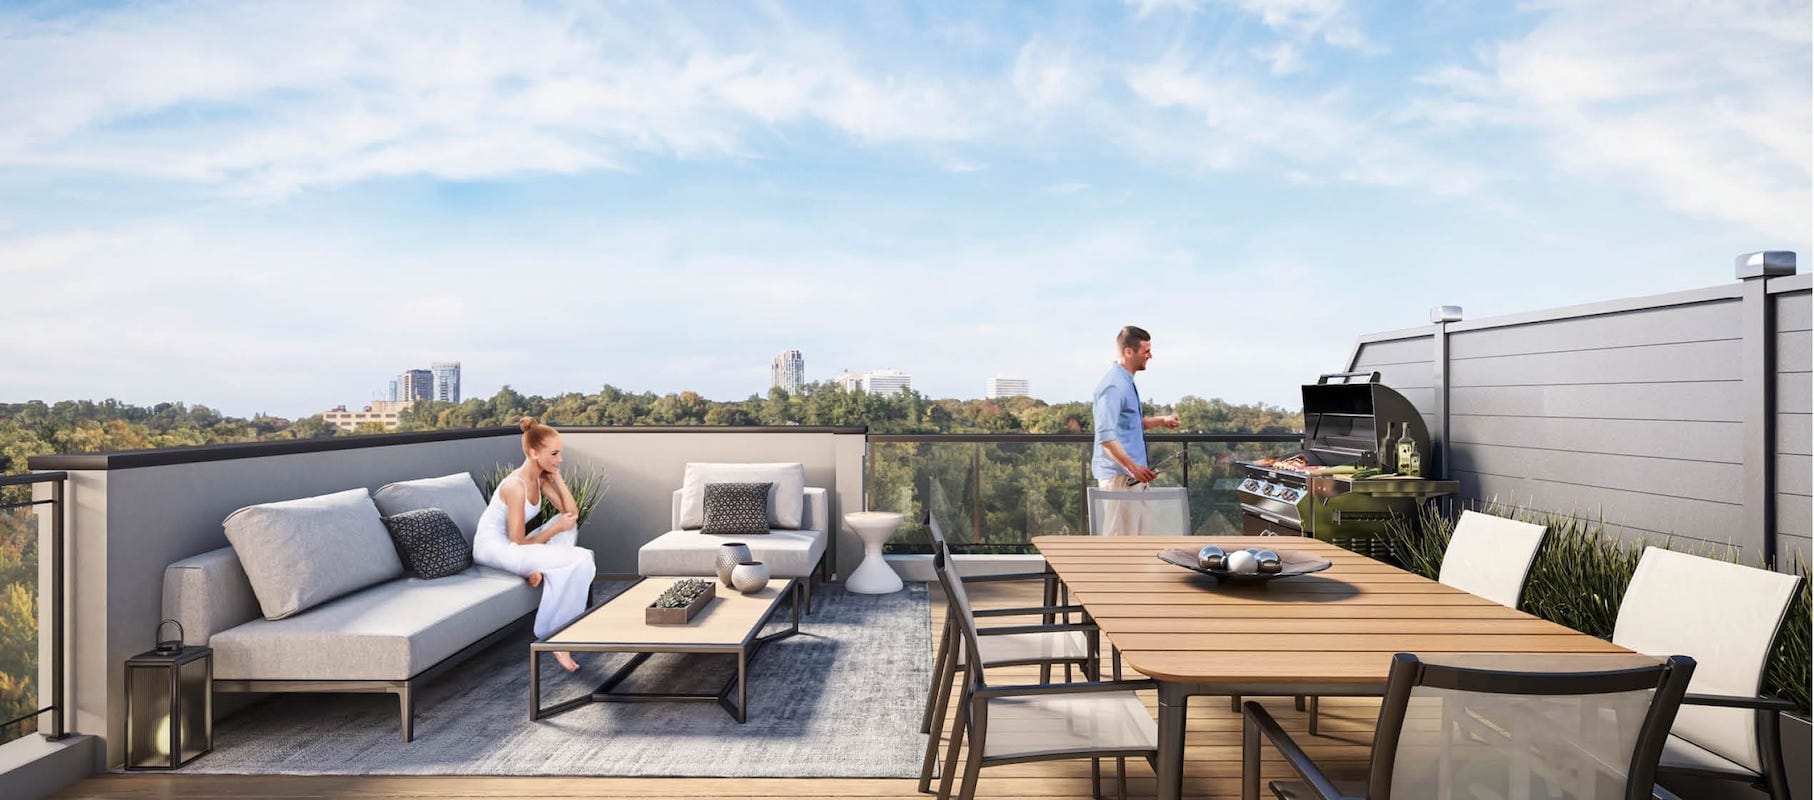 Rendering of The Way Towns 2 rooftop terrace.